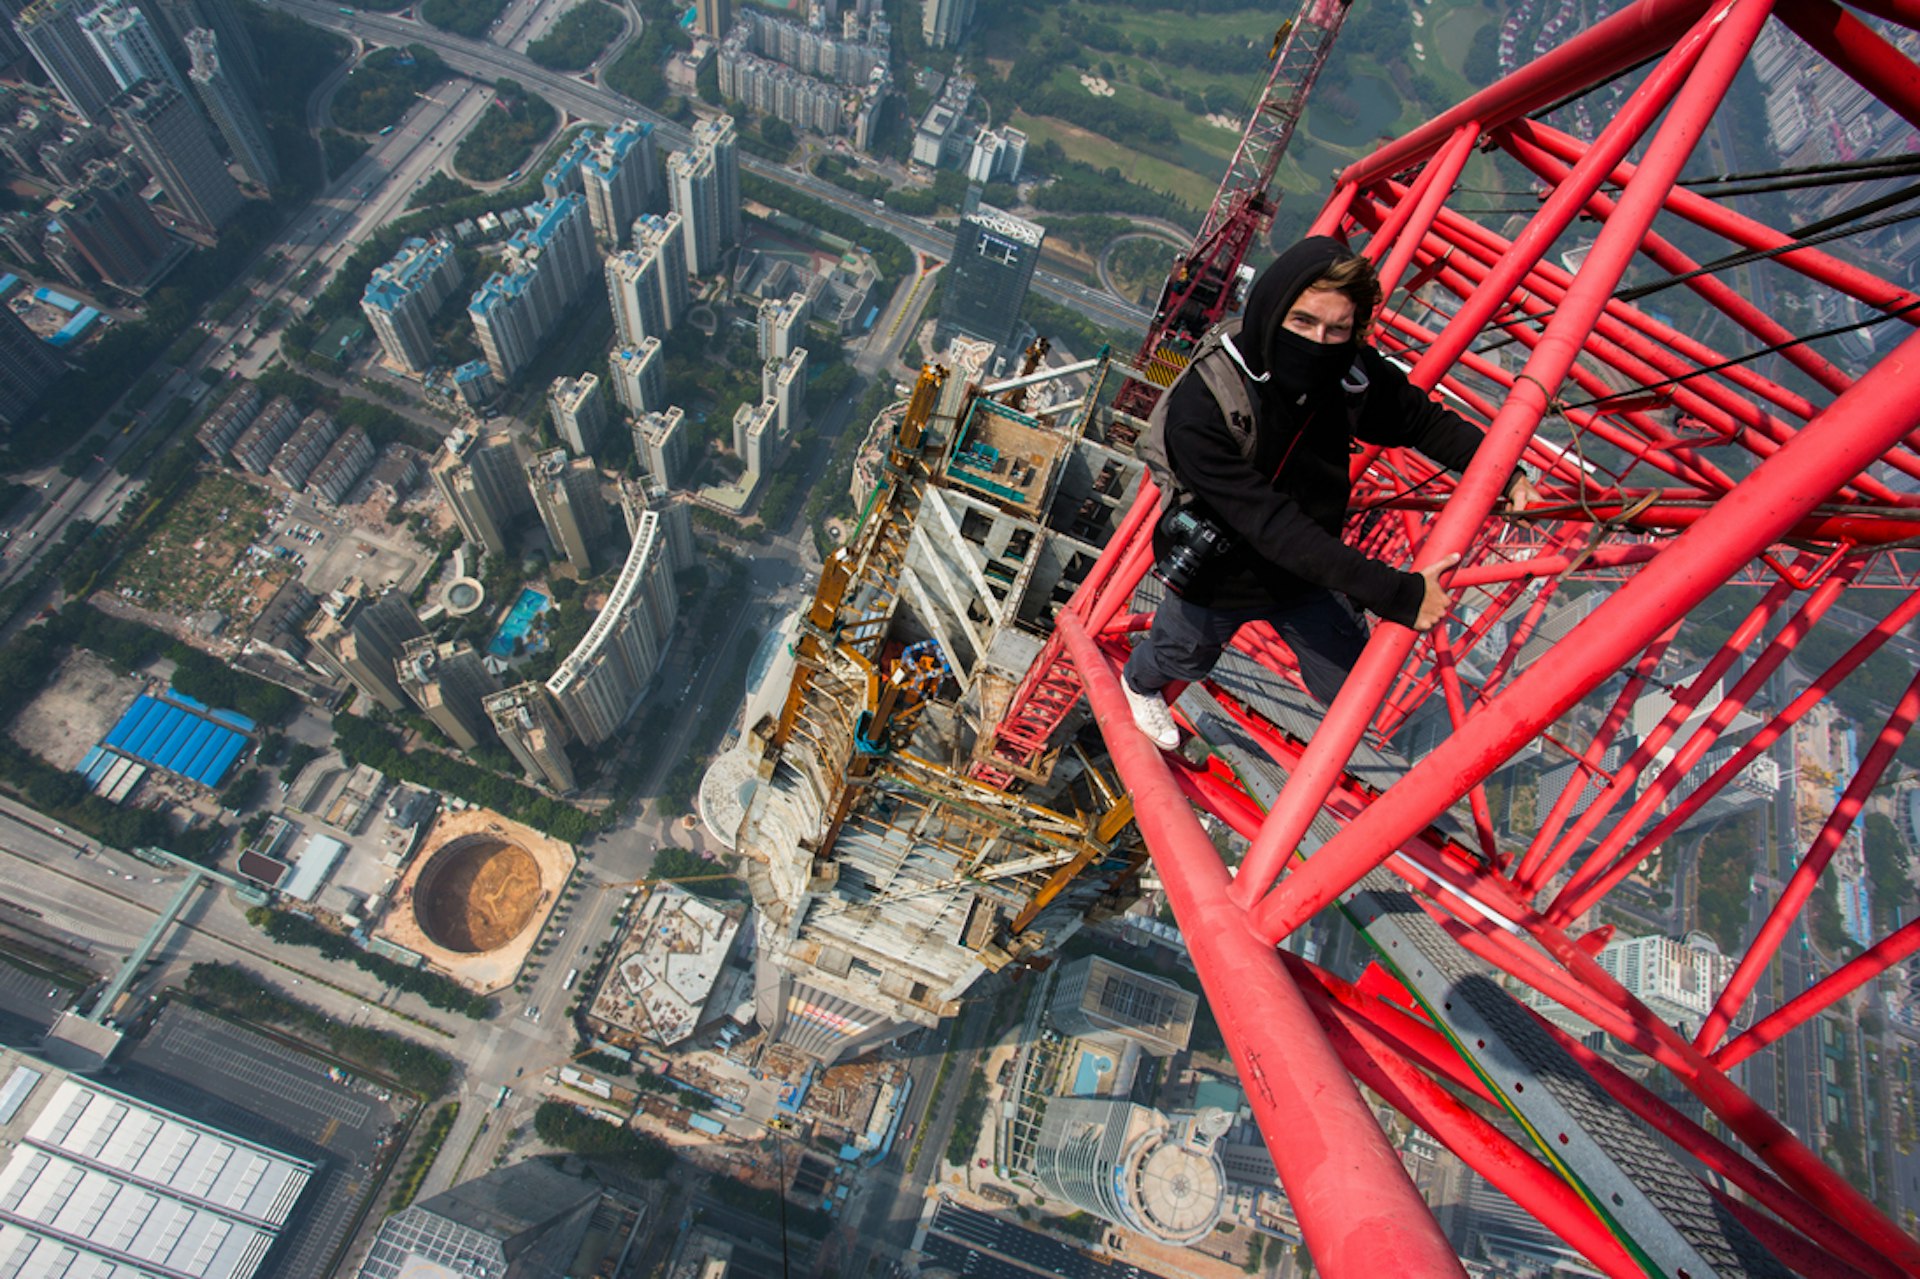 The daredevil climber risking his life for breathtaking views